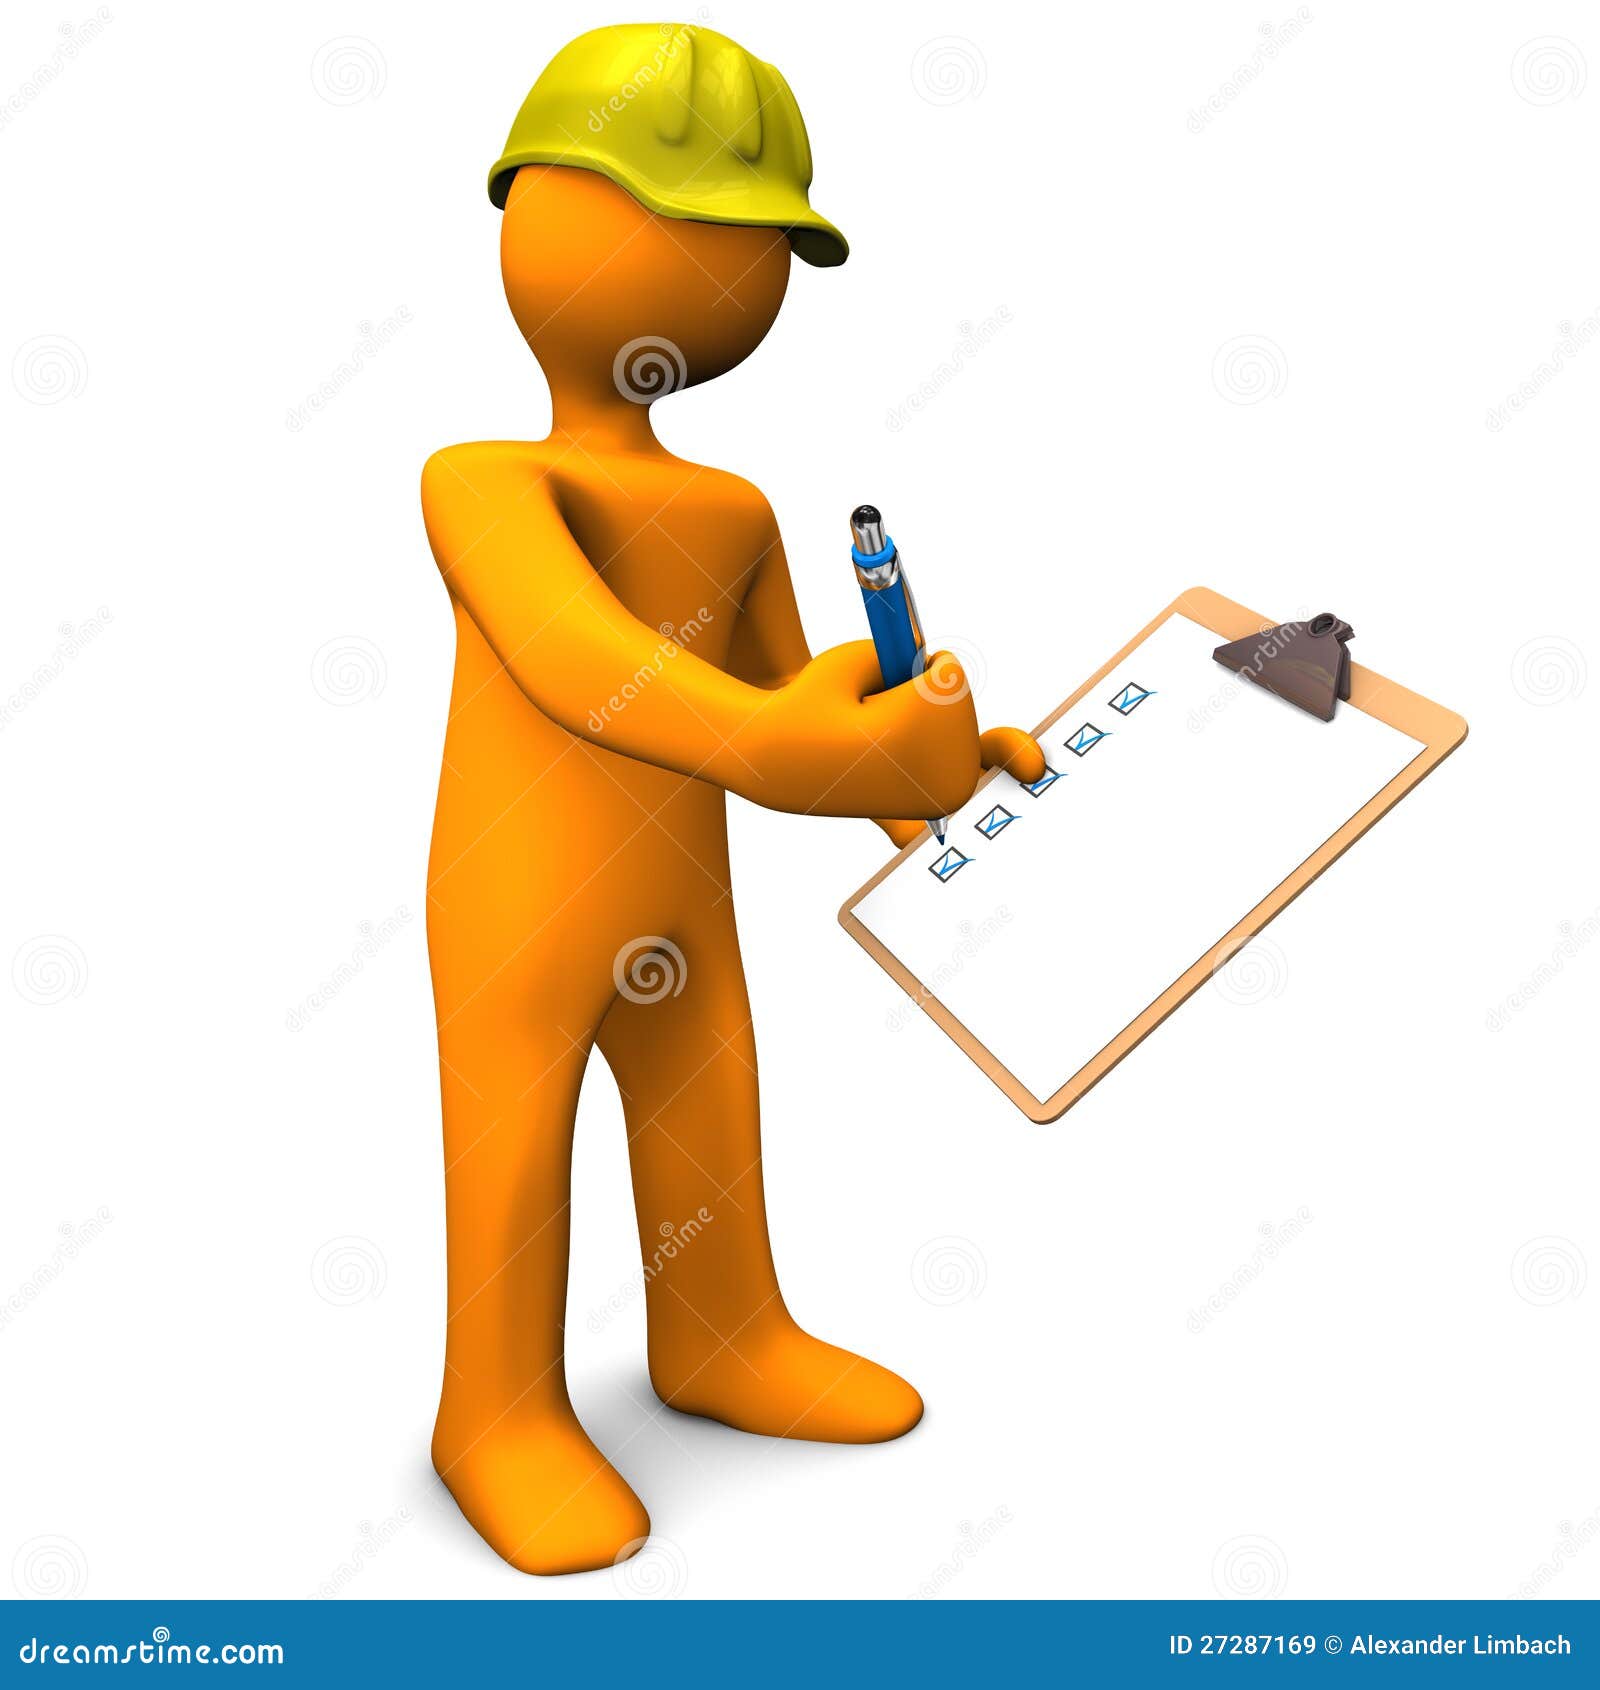 quality check clipart - photo #14